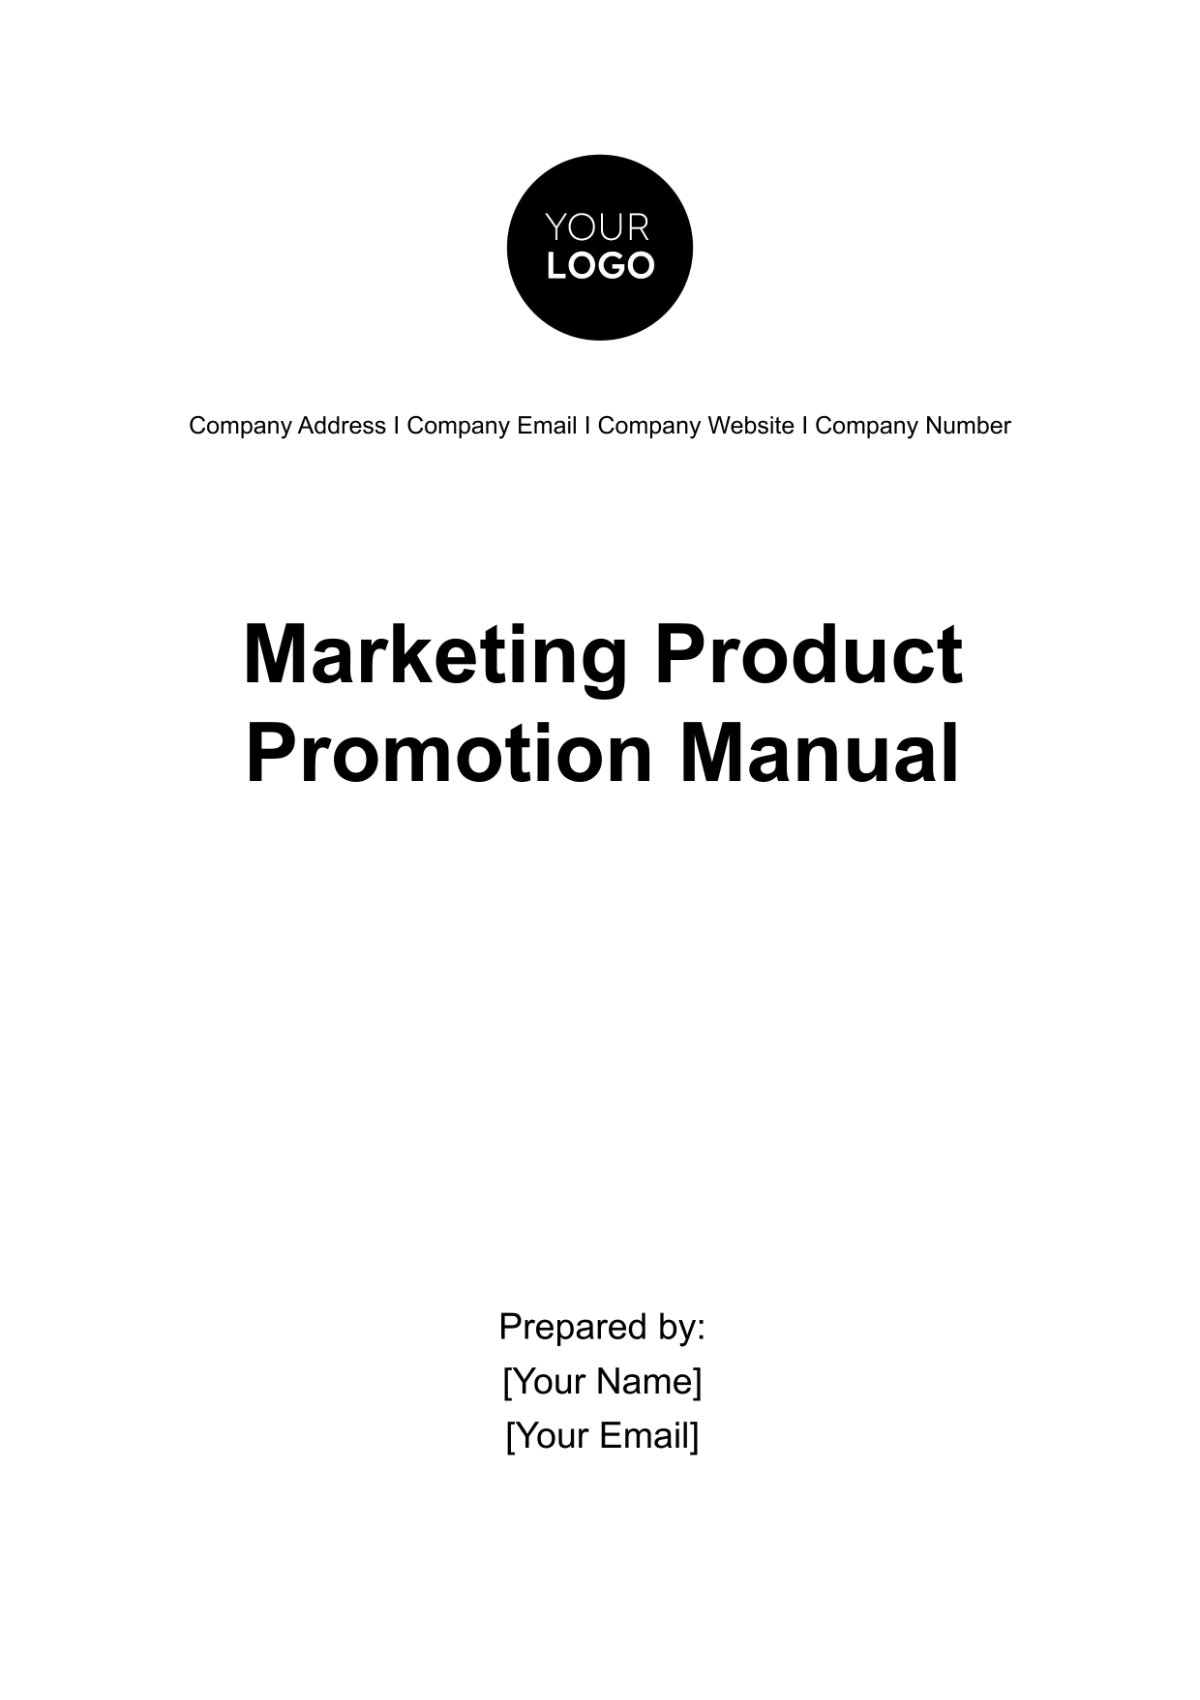 Marketing Product Promotion Manual Template